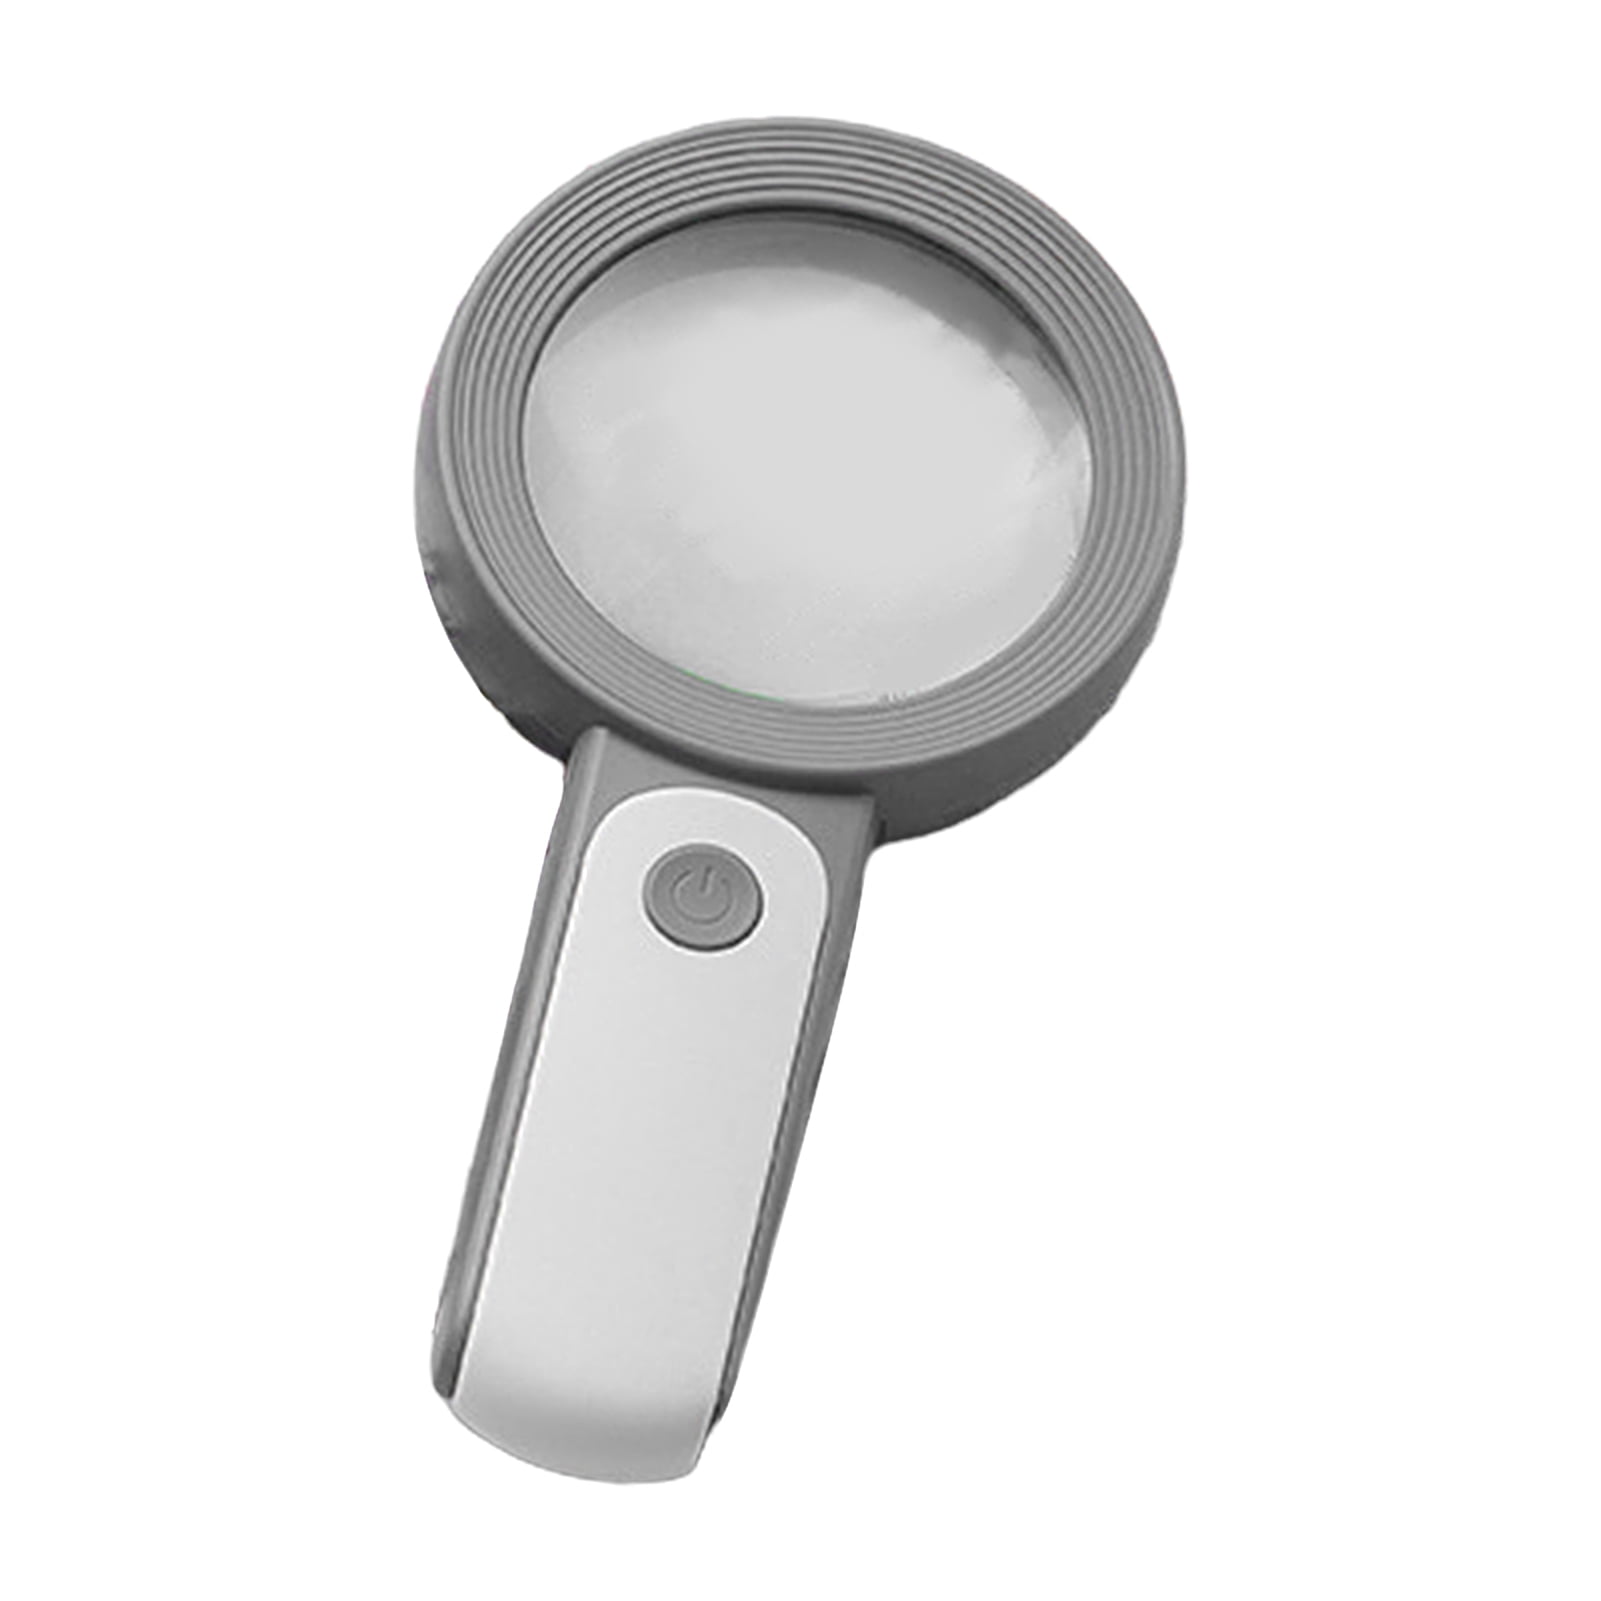 25X 8X Microscope Folding Magnifier Stand Loupe With Light For Textile  Optical Foldable Magnifying Glass Tool